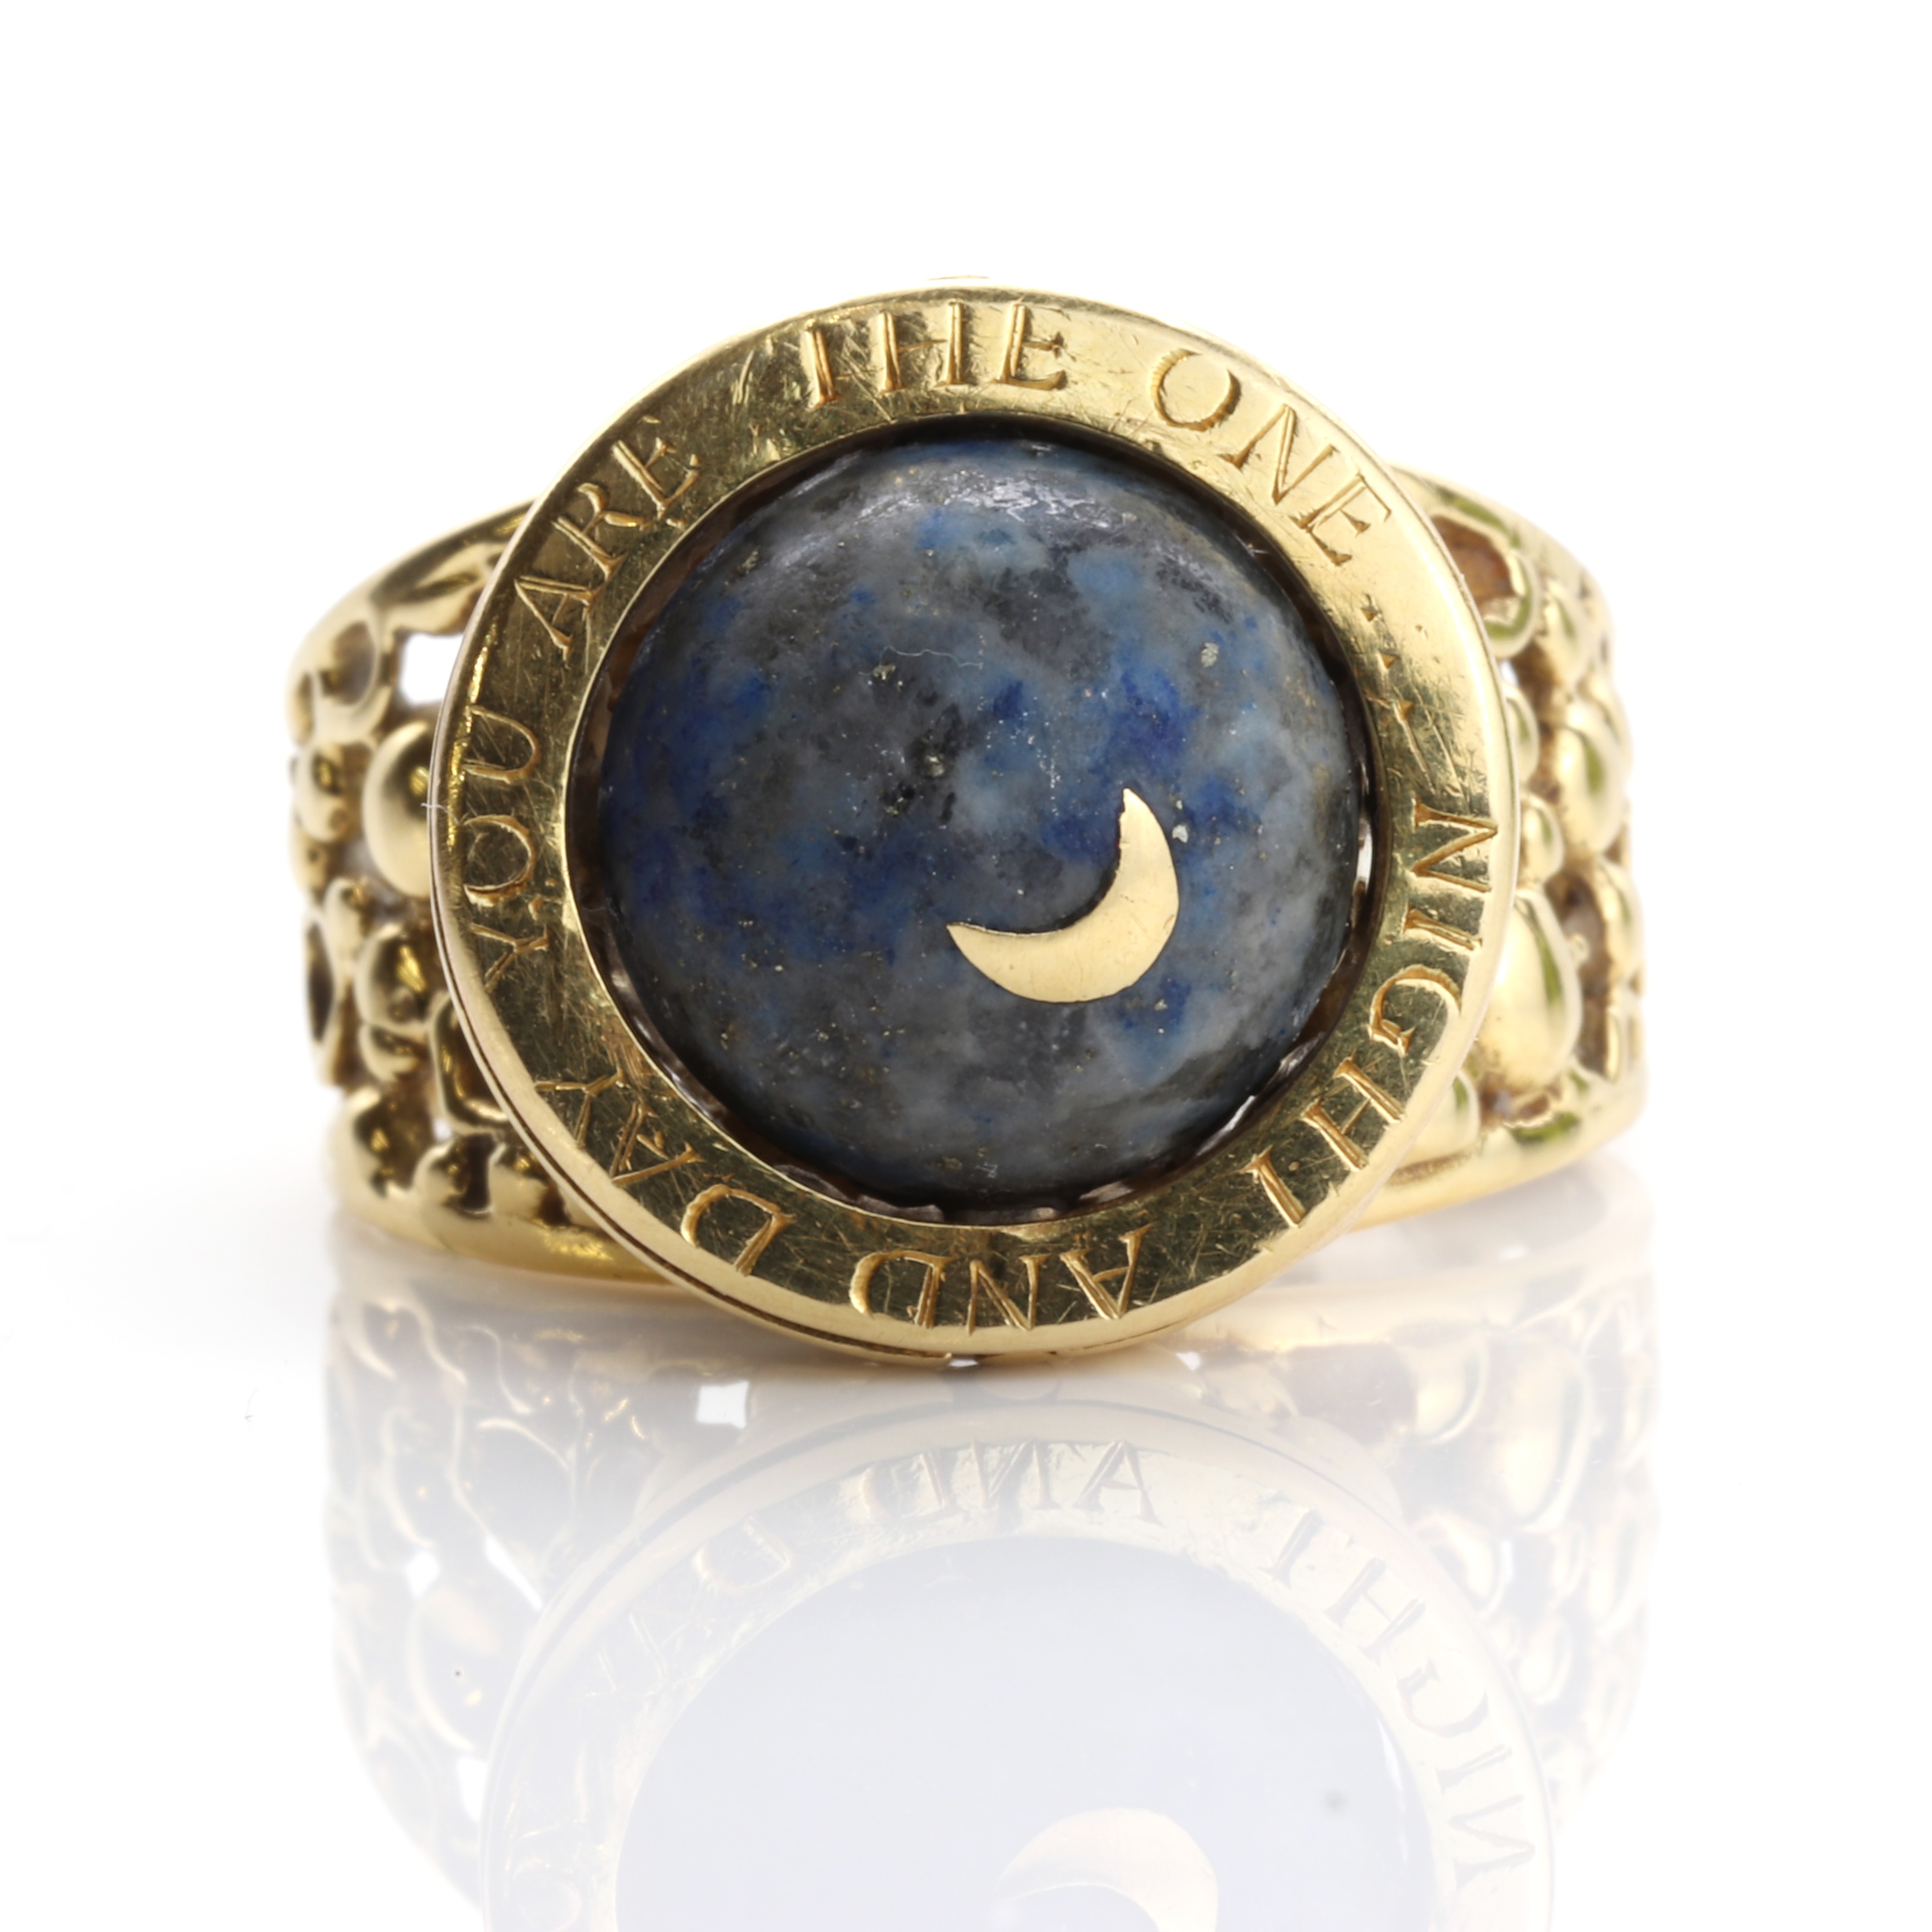 An 18ct gold lapis lazuli and diamond ring, attributed to John Donald (Sold for £3,600)